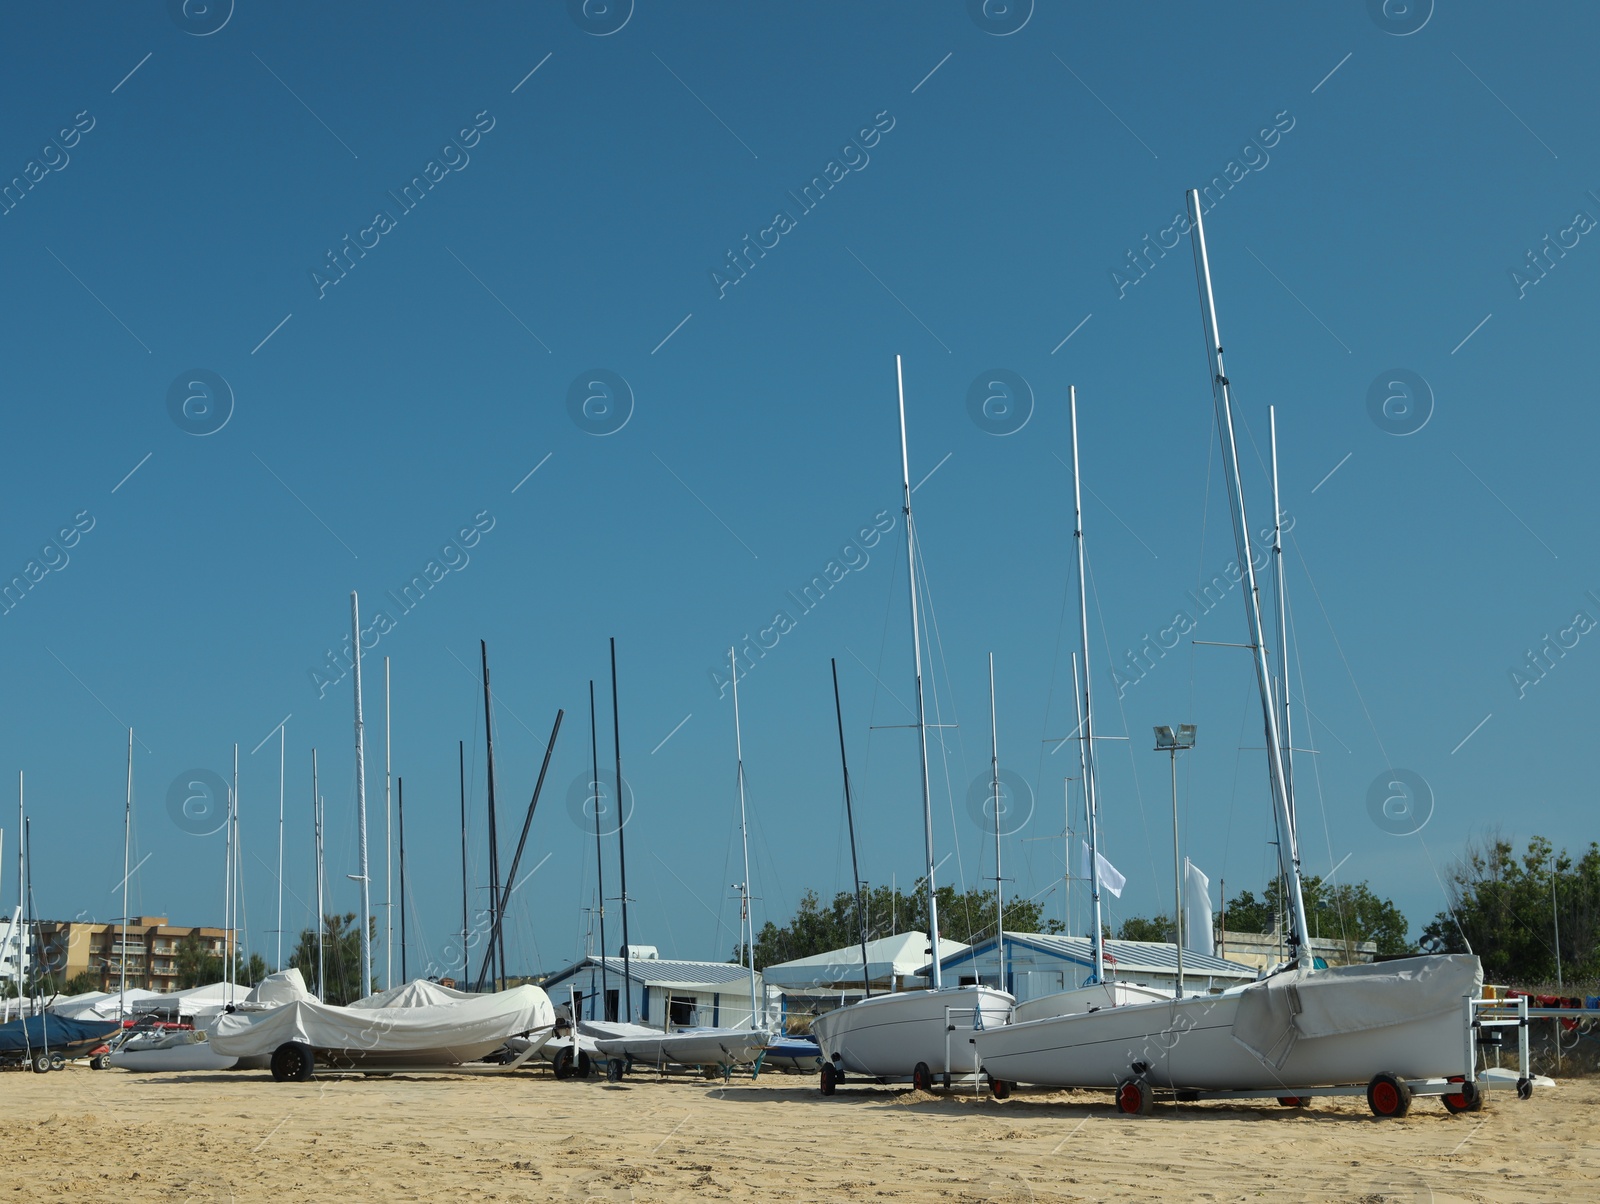 Photo of Seacoast with modern boats on sunny day